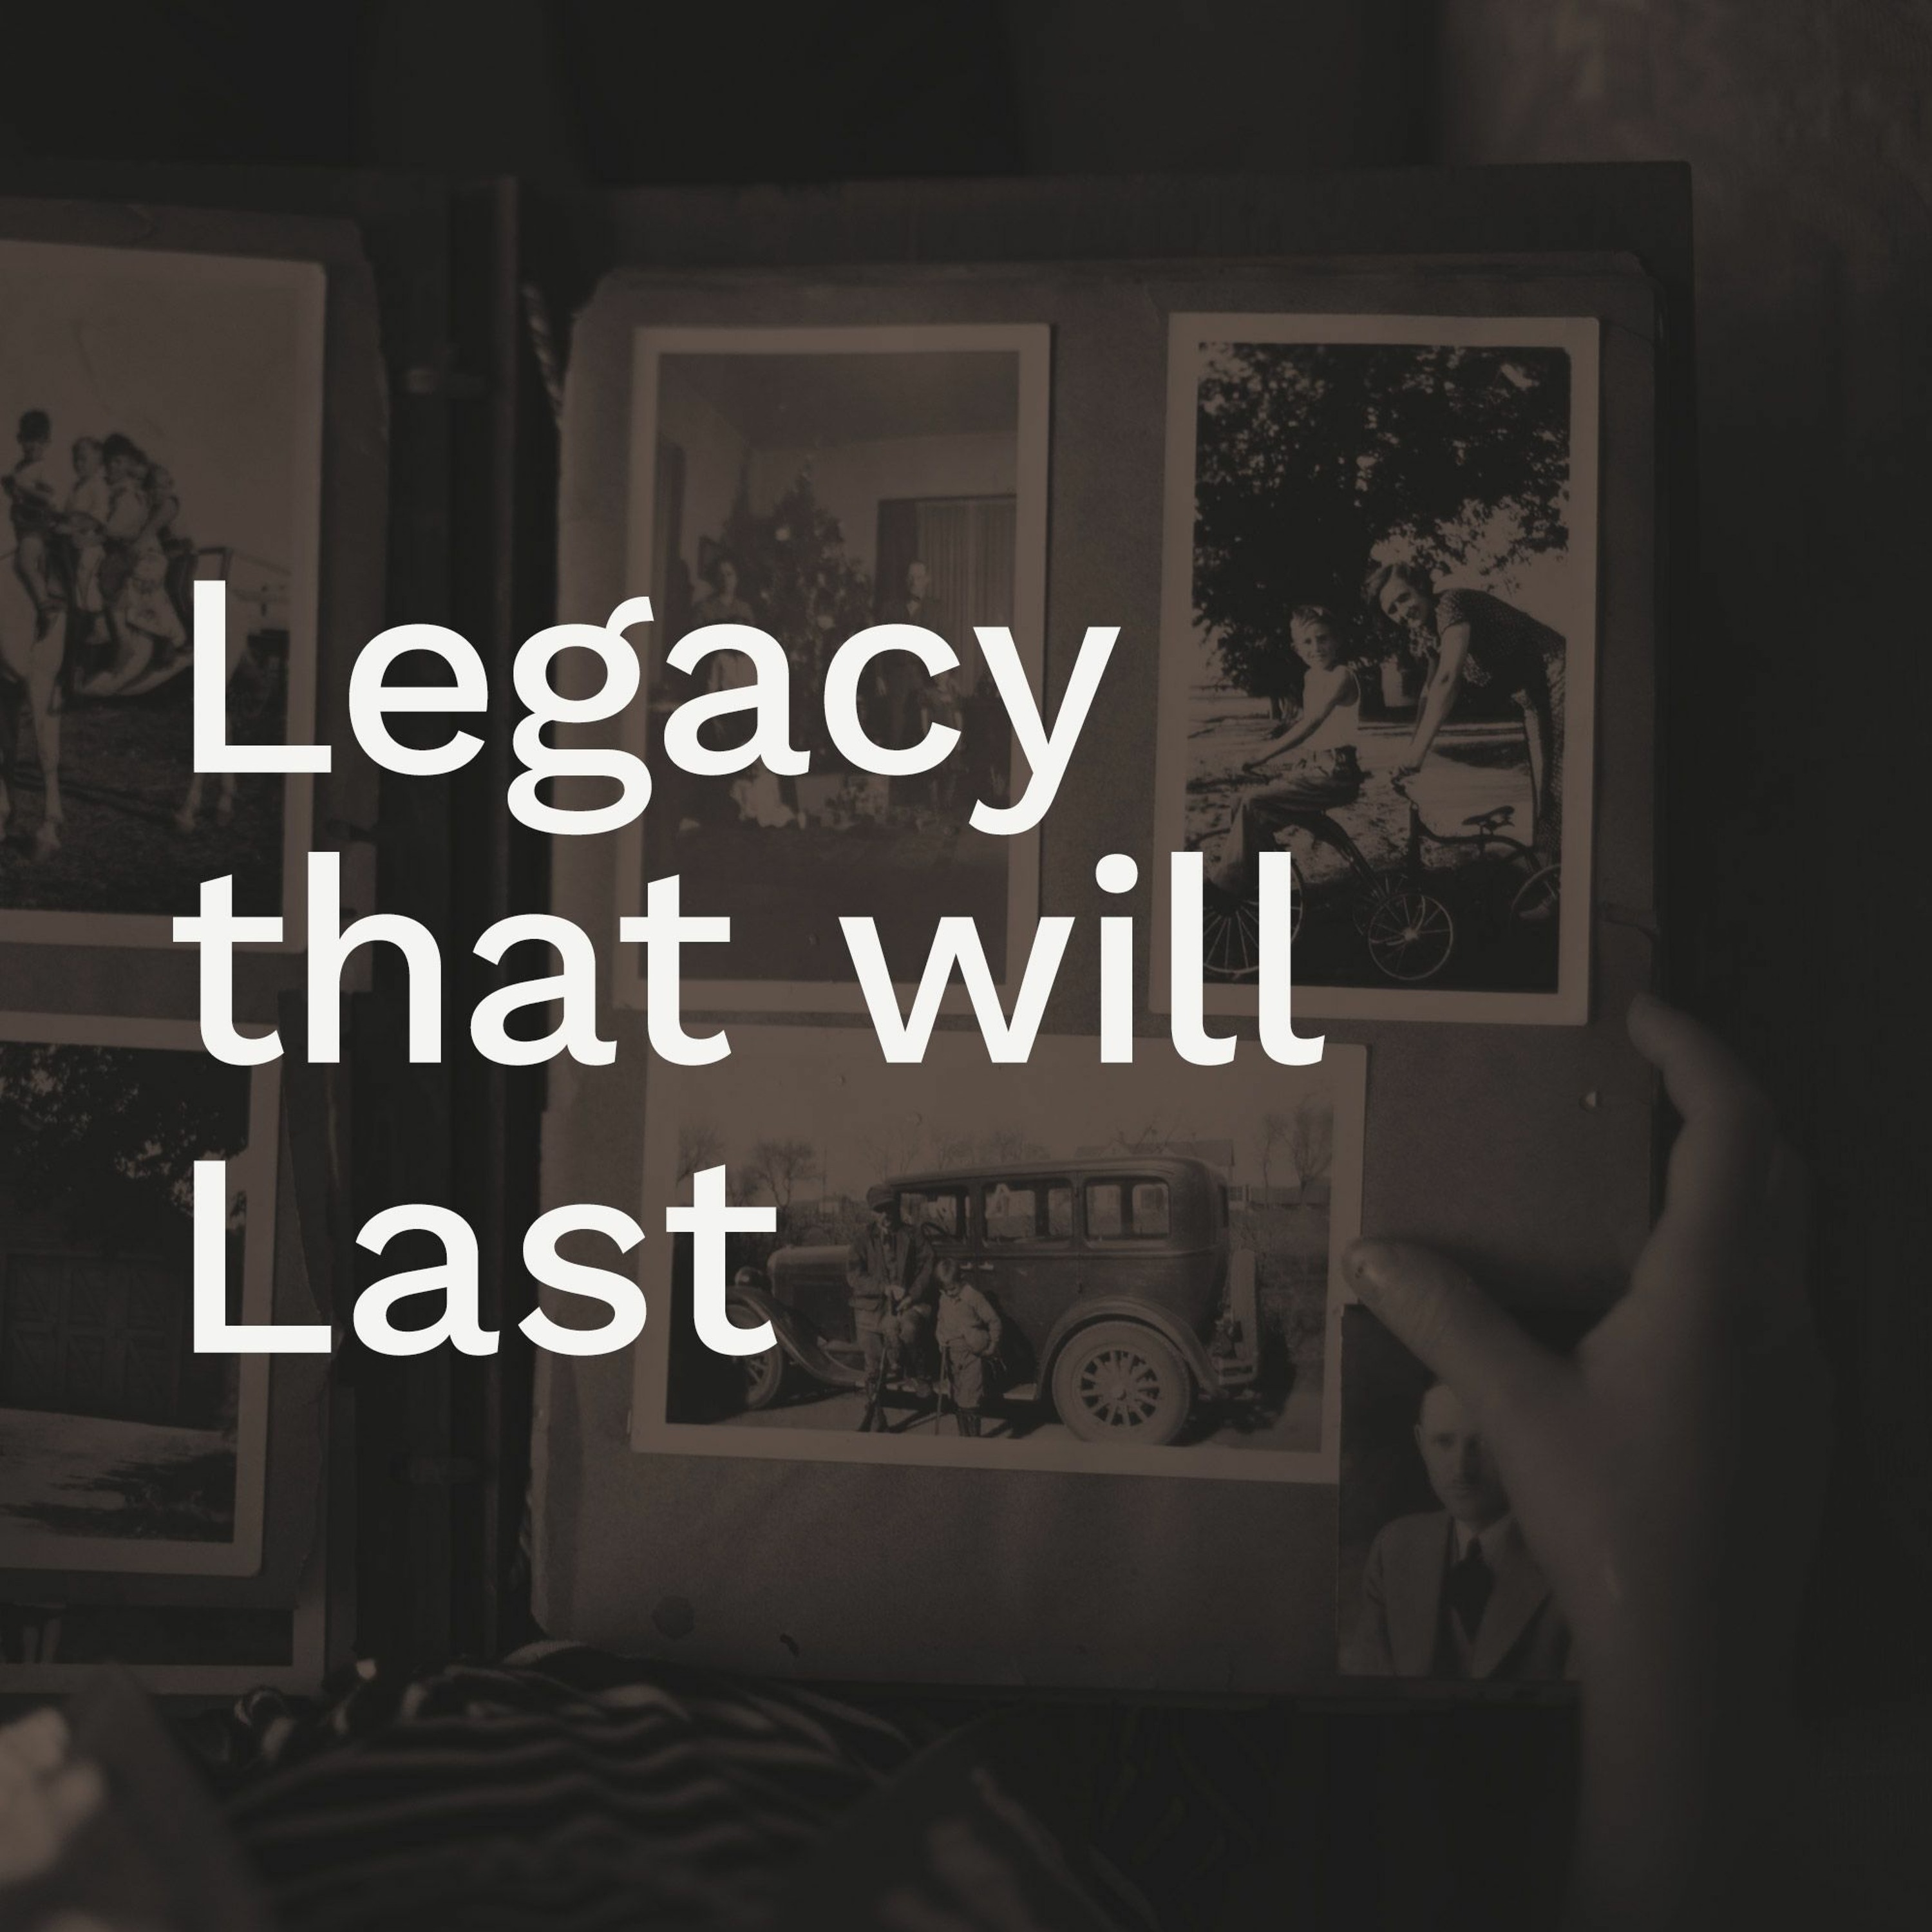 ’Legacy that will Last’ / Neville Garland